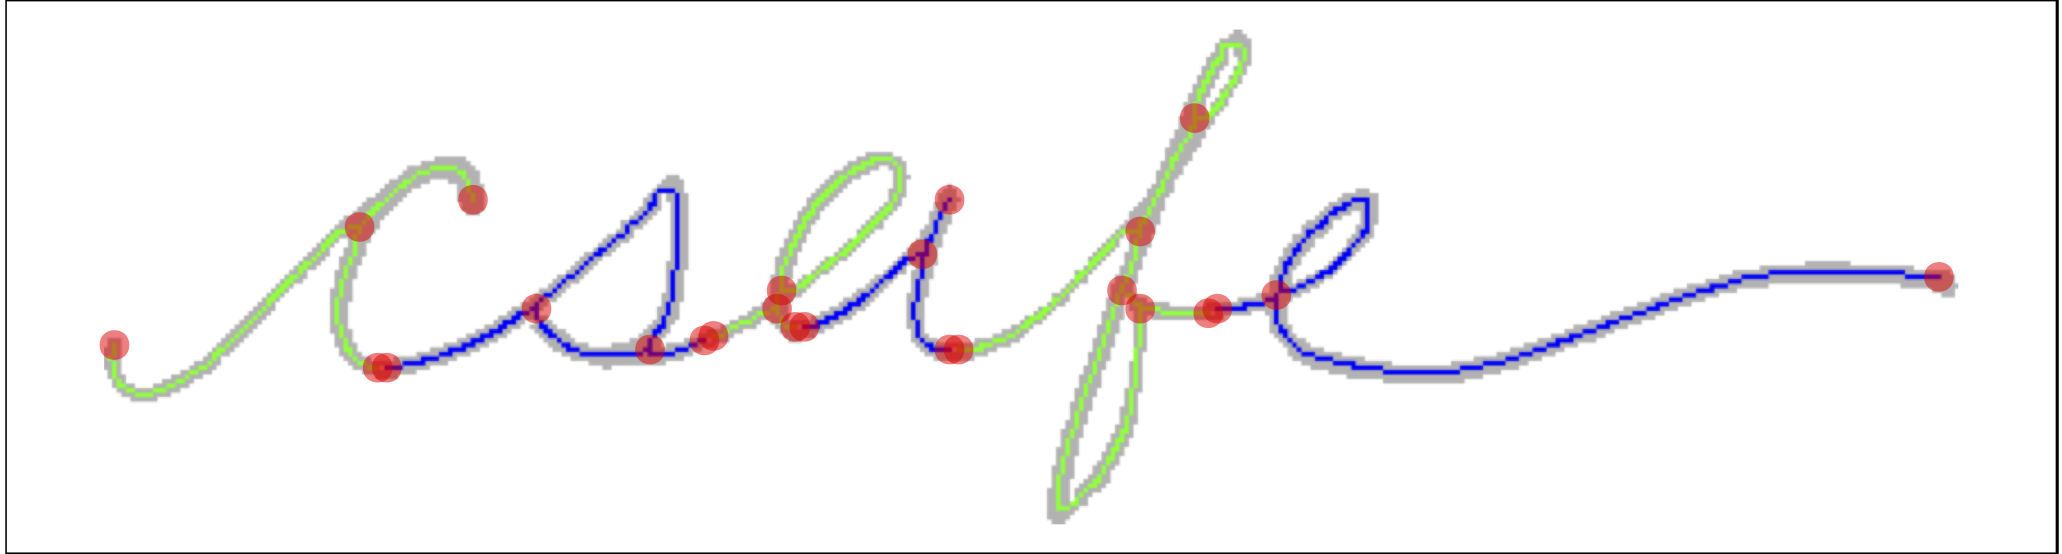 Connected text processed by `handwriter`. The grey background is the original pen stroke. Colored lines represent the single pixel skeleton with color changes marking glyph decomposition. Red dots mark endpoints and intersections of each glyph.